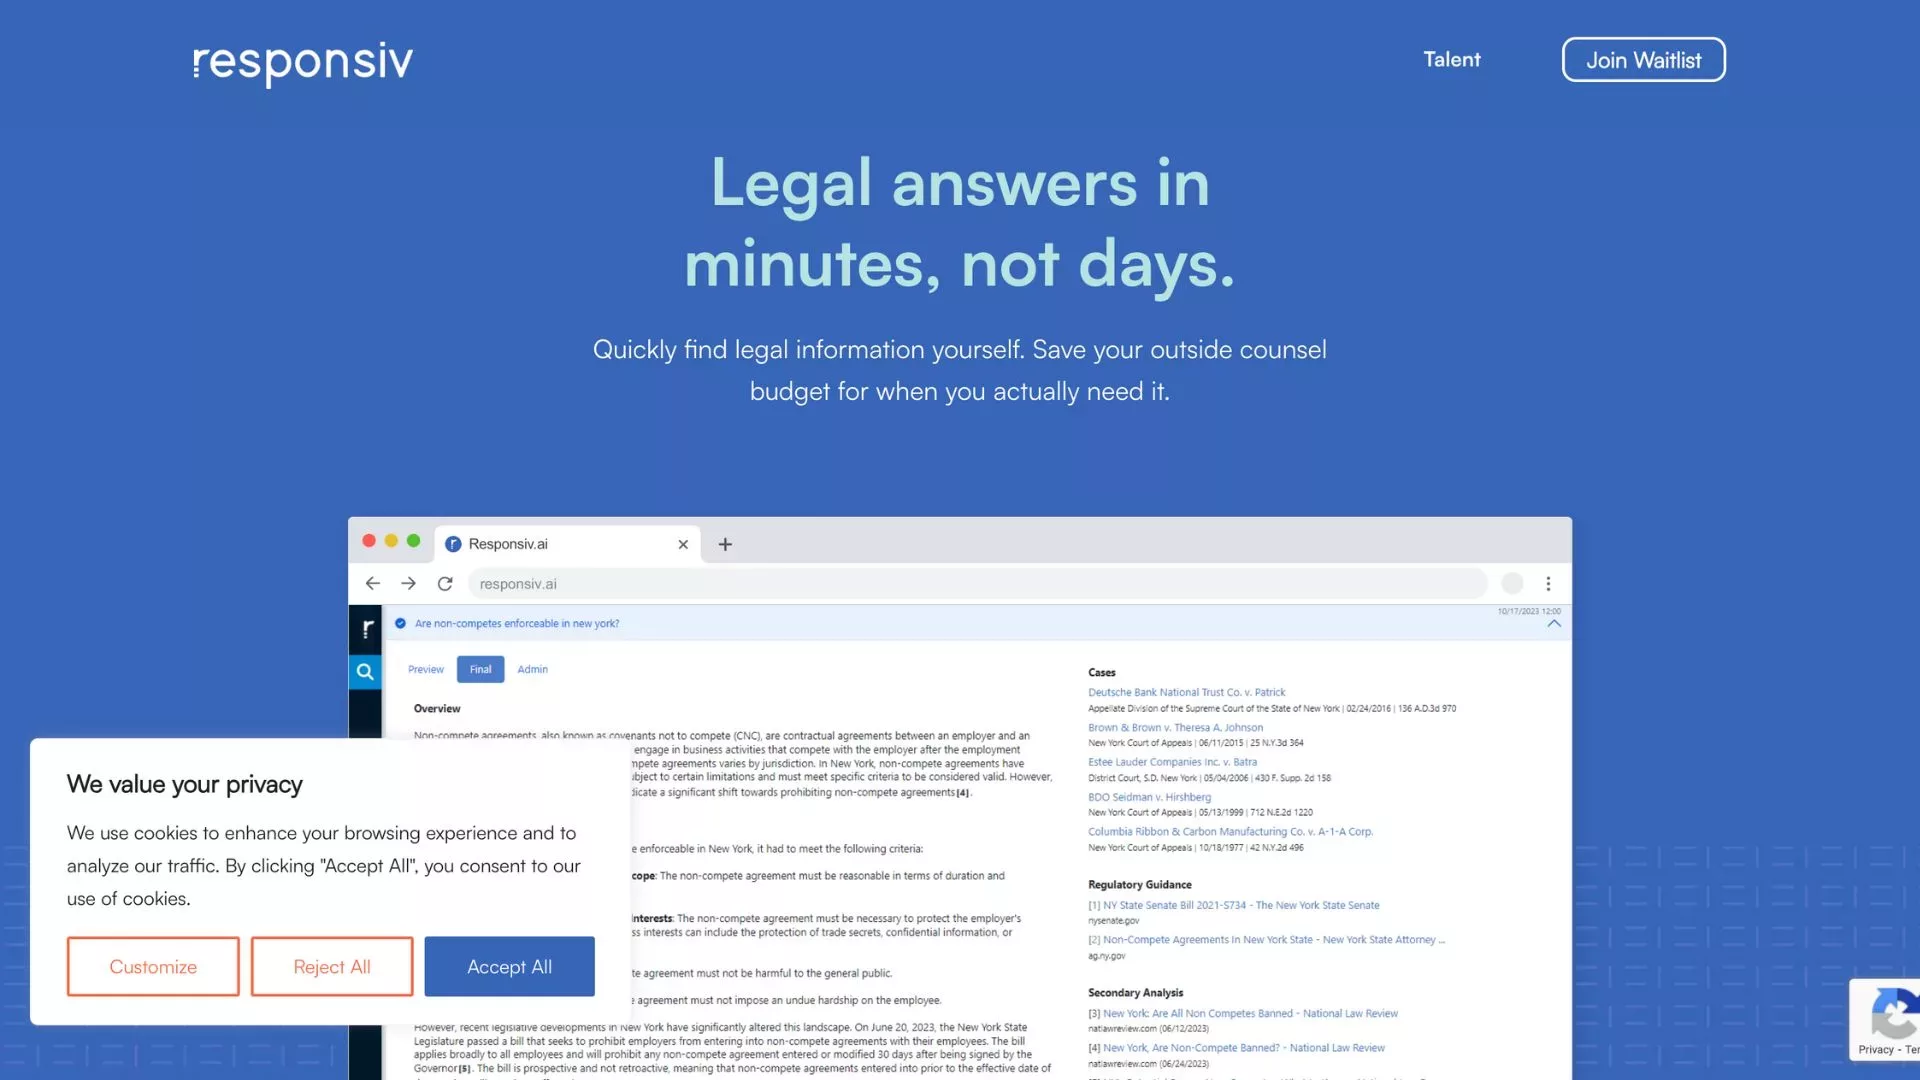 Responsiv Secures $3M to Empower Lawyers with AI